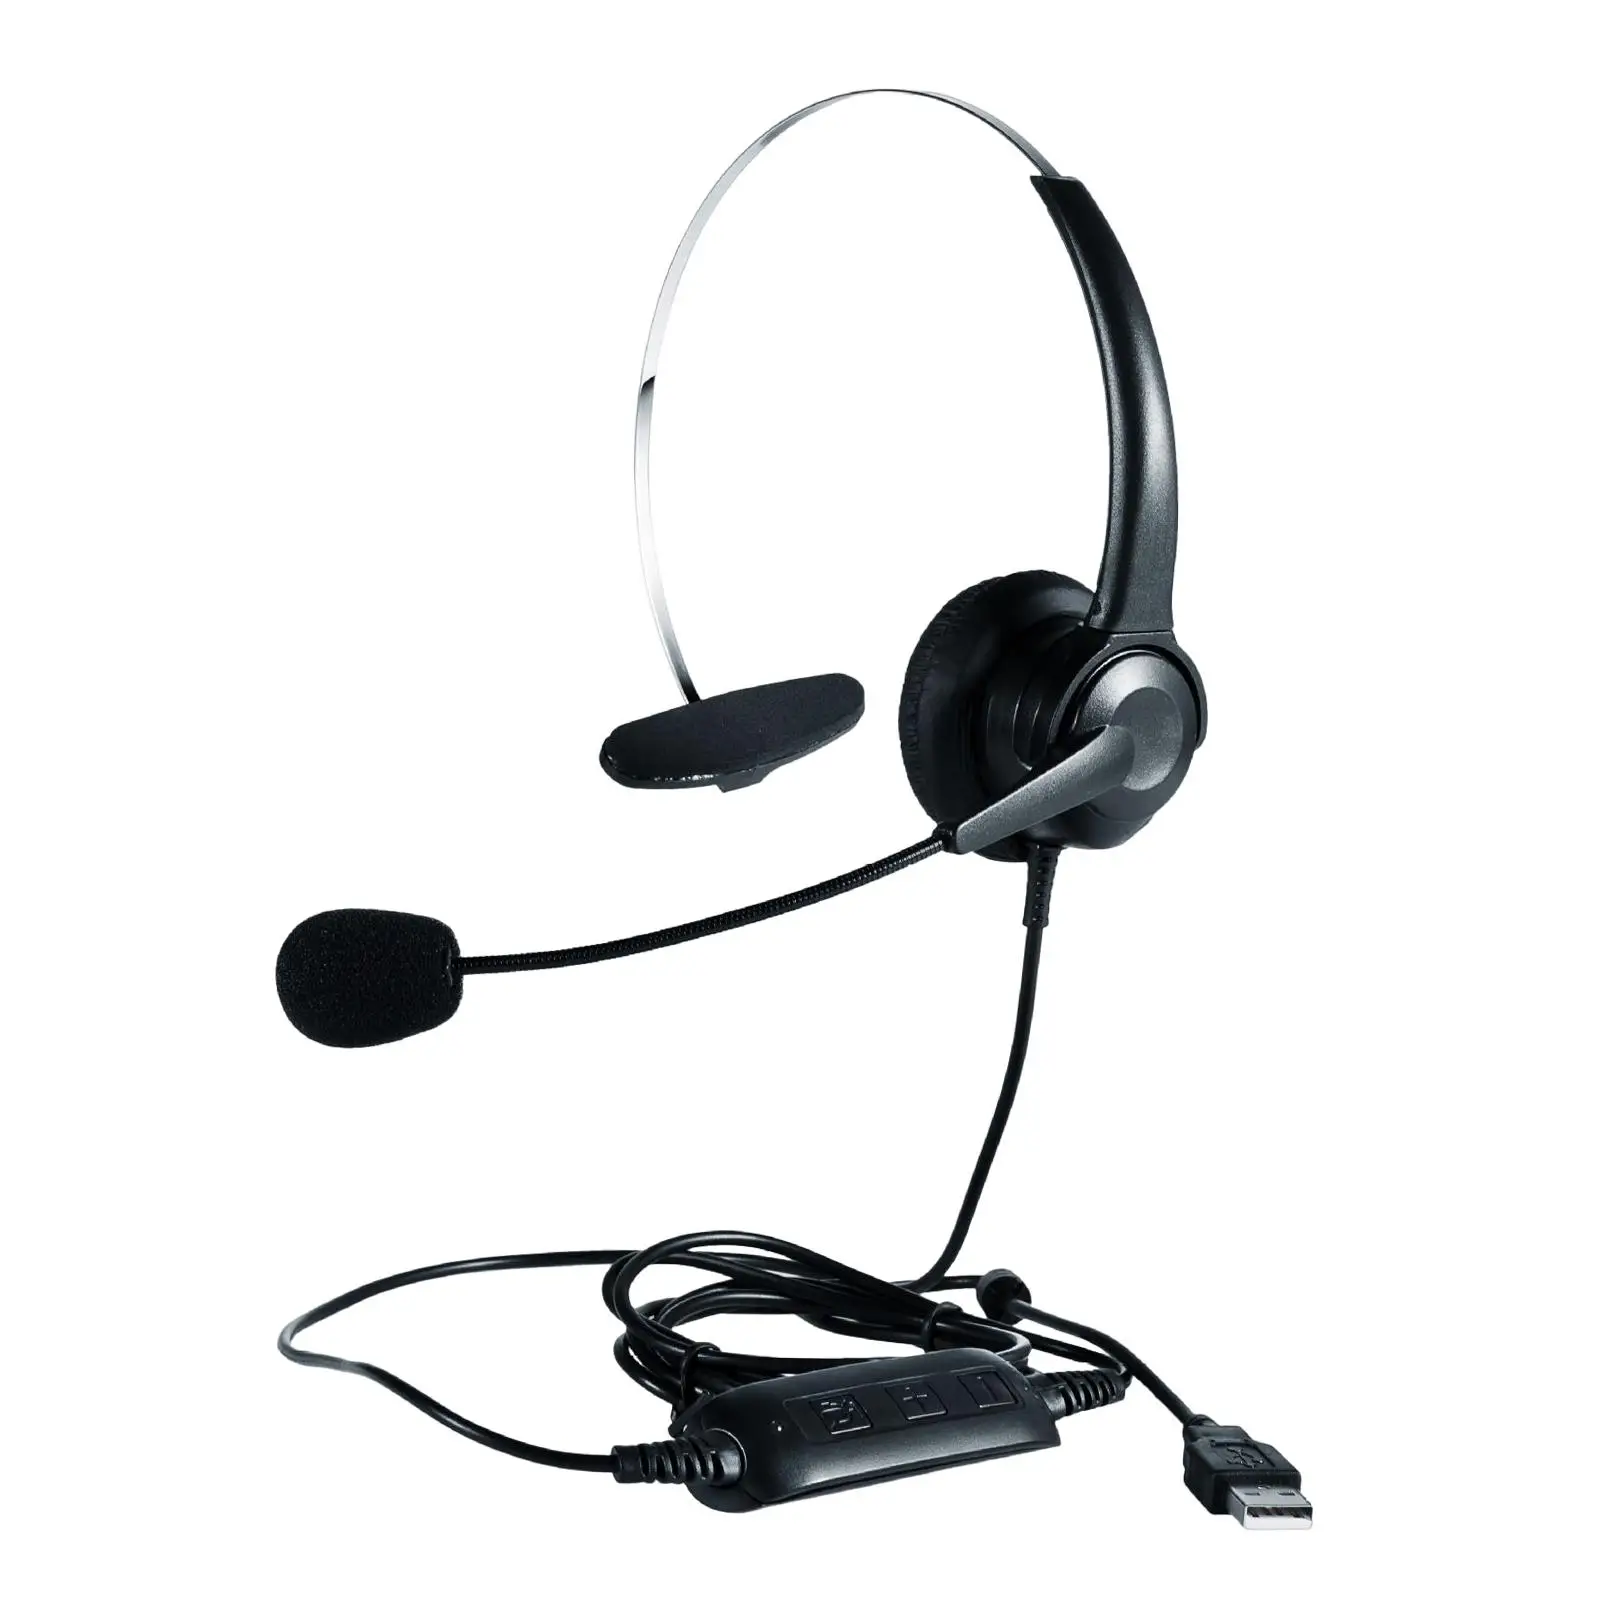 Stereo Headset with Microphone Portable Comfortable for online Home Laptop